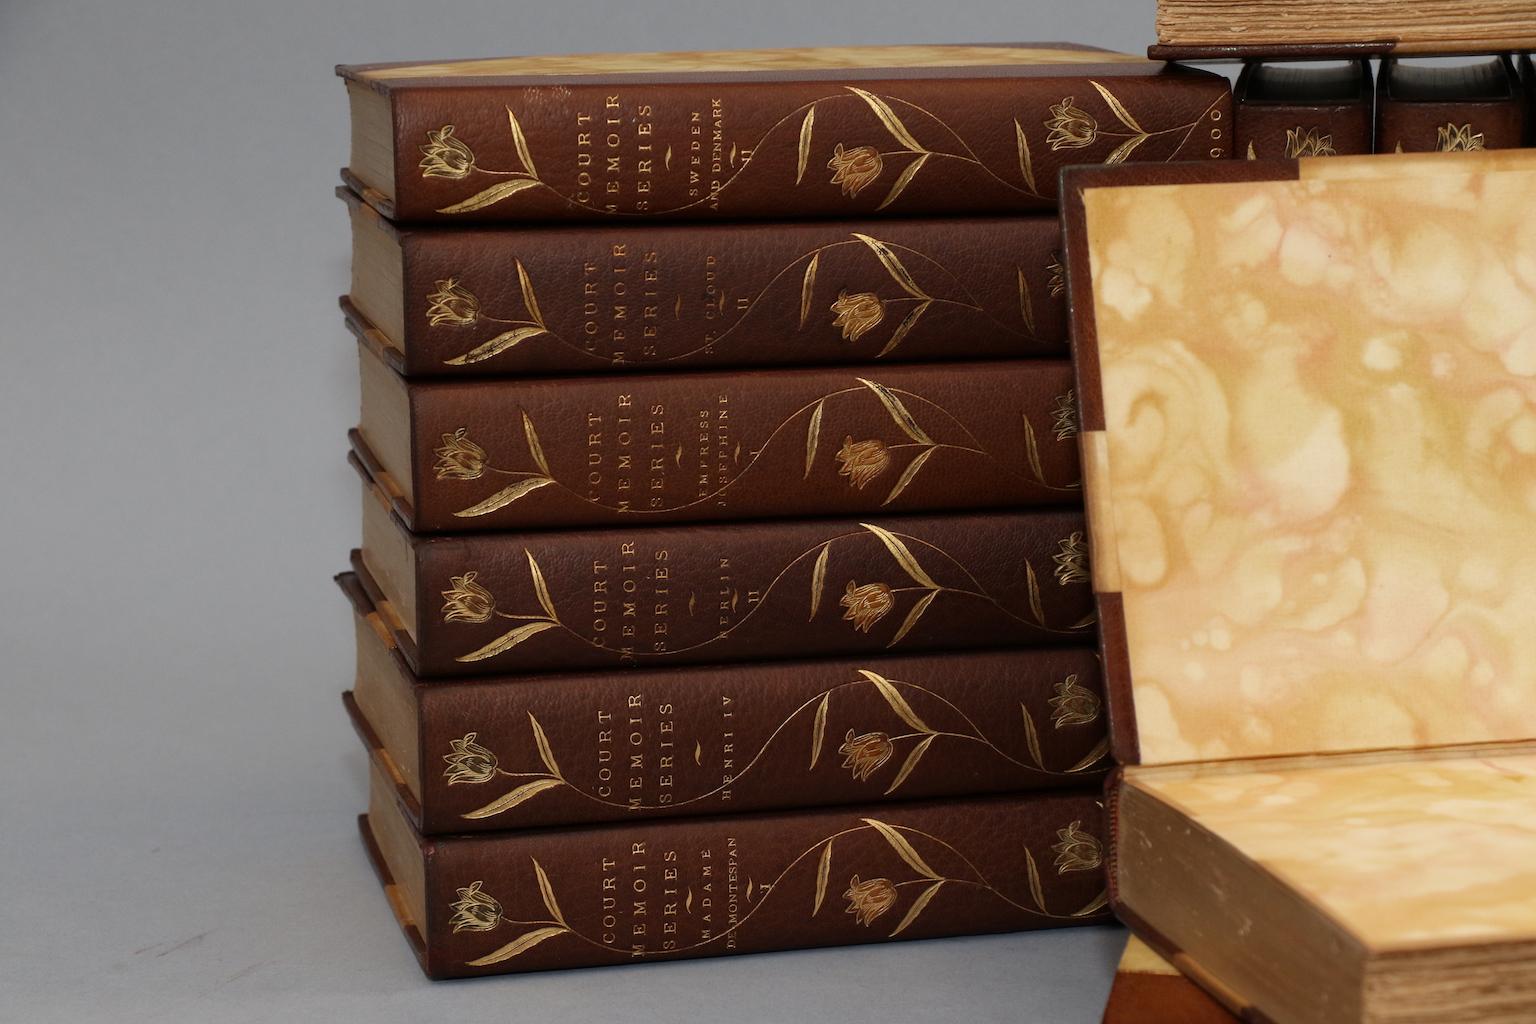 20 volumes. Titles include Louis XV-XVI, Empress Josephine, Henry IV, Marie Antoinette, etc. Bound in 3/4 tan Morocco with marbled boards, top edges gilt, and ornate floral gilt on spines. Beautifully illustrated! Published in Boston by L.C. Page &